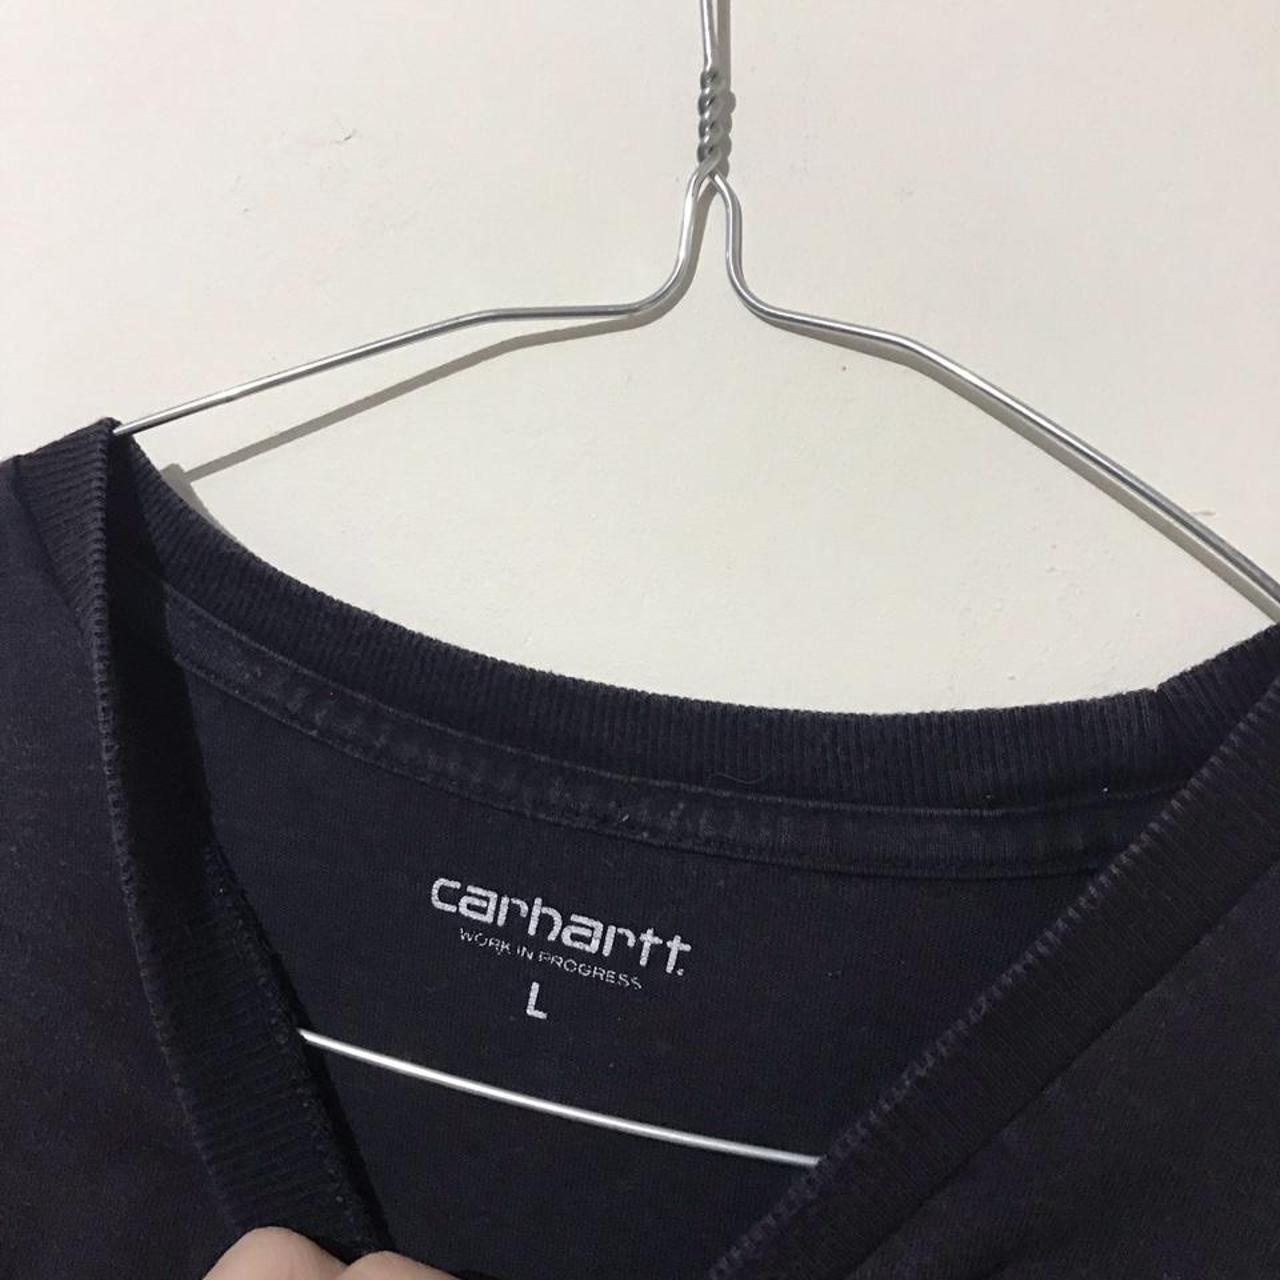 Product Image 3 - Men's carhartt tee

Label size large